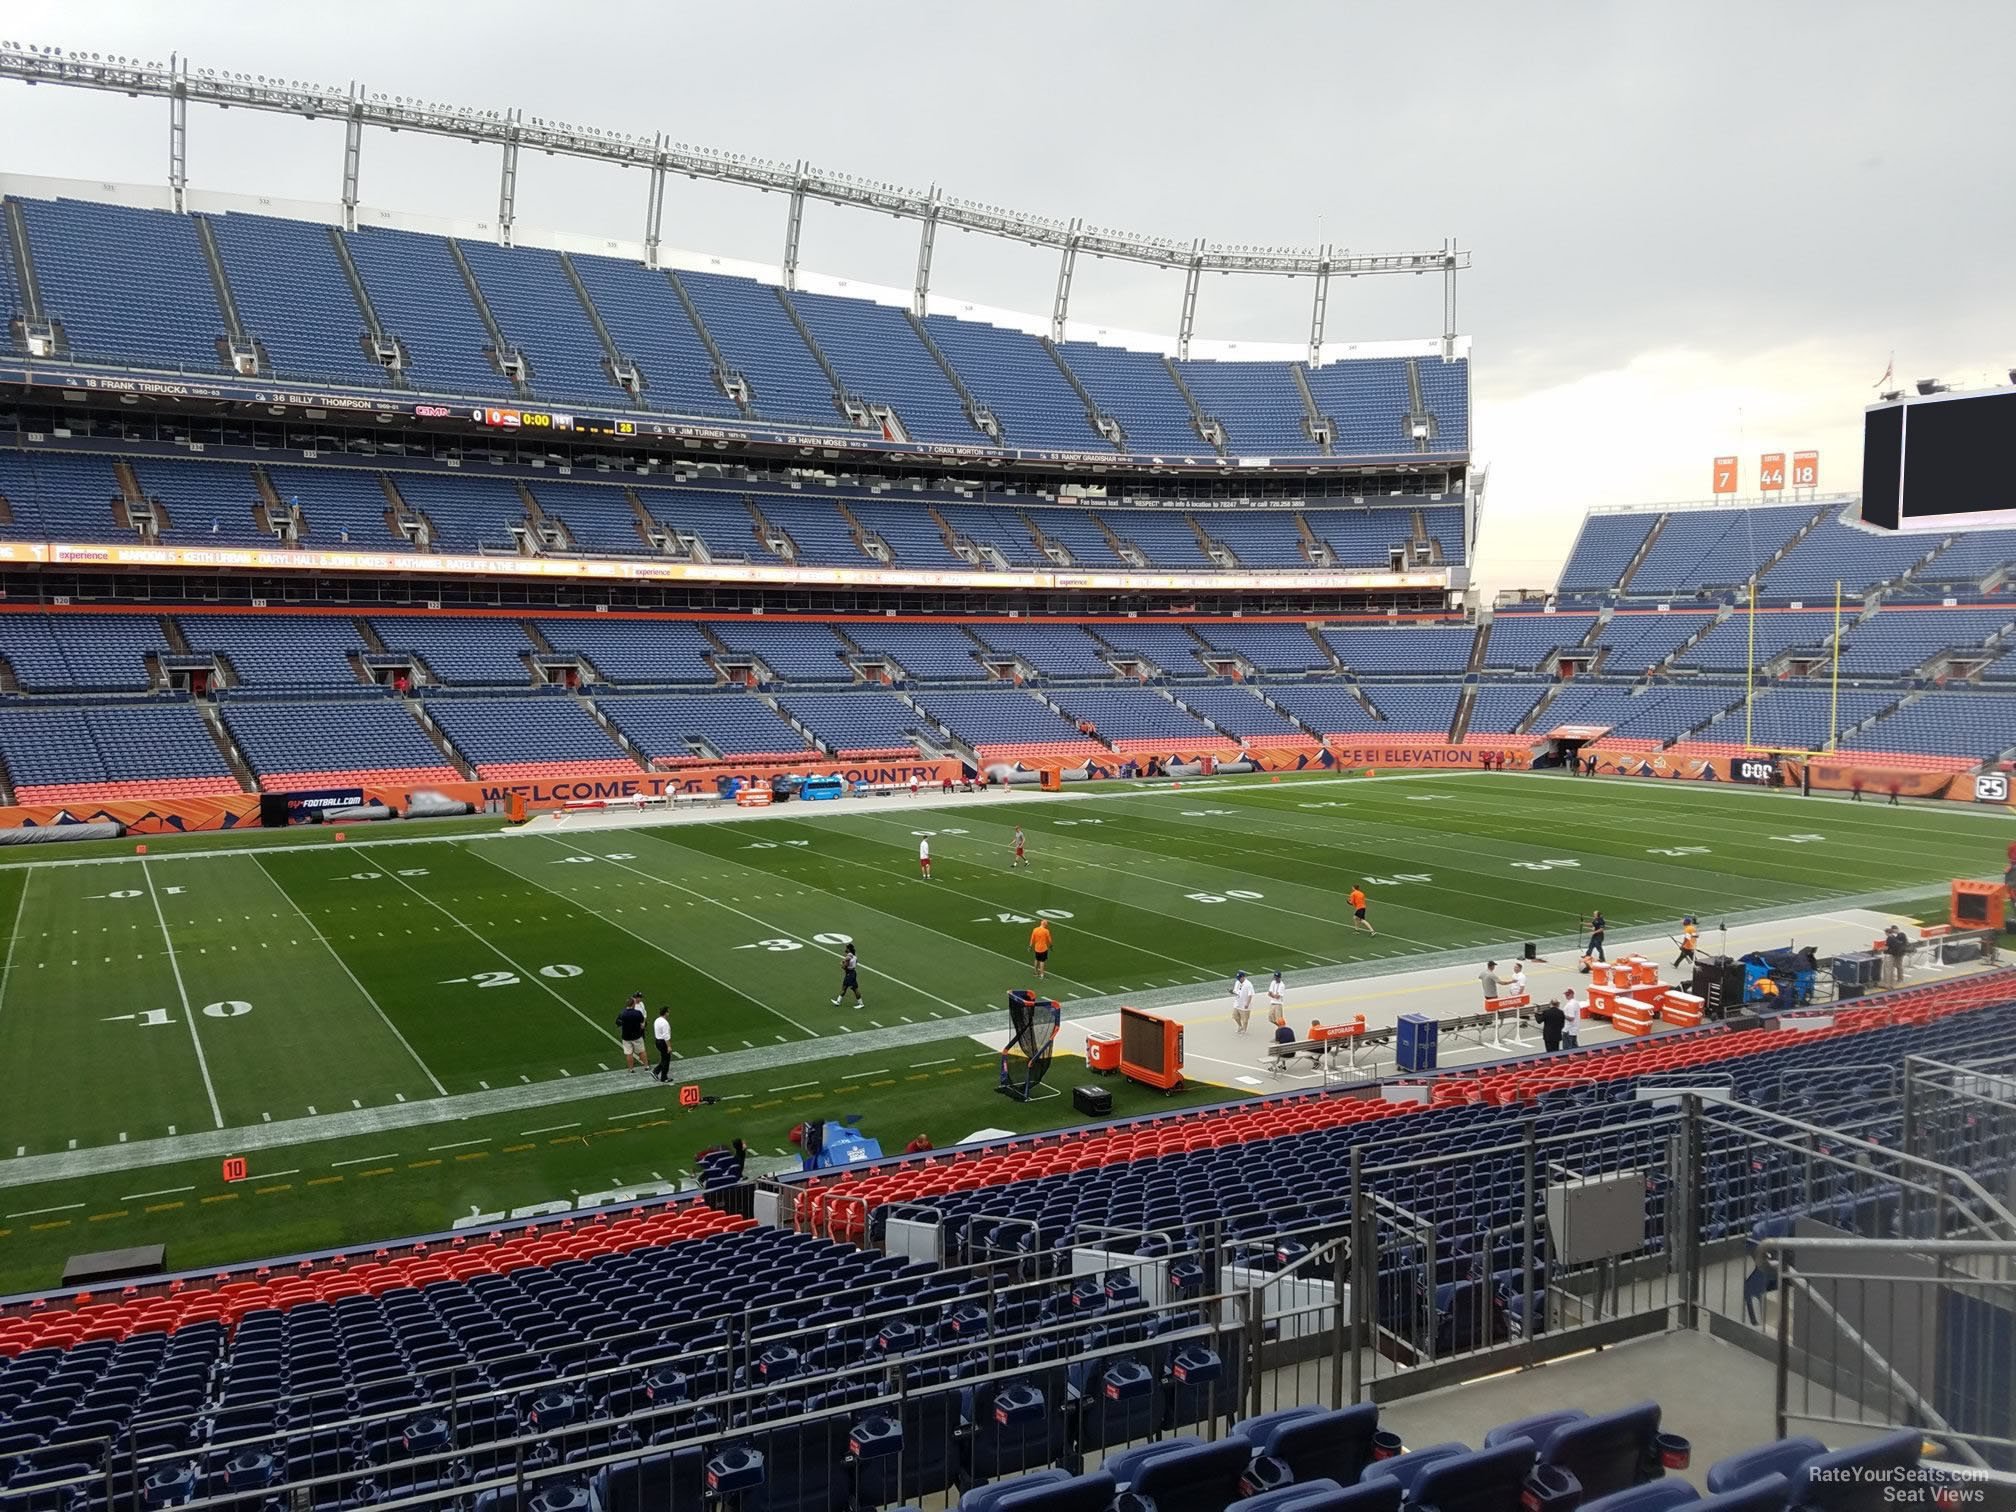 section 108, row 30 seat view  - empower field (at mile high)